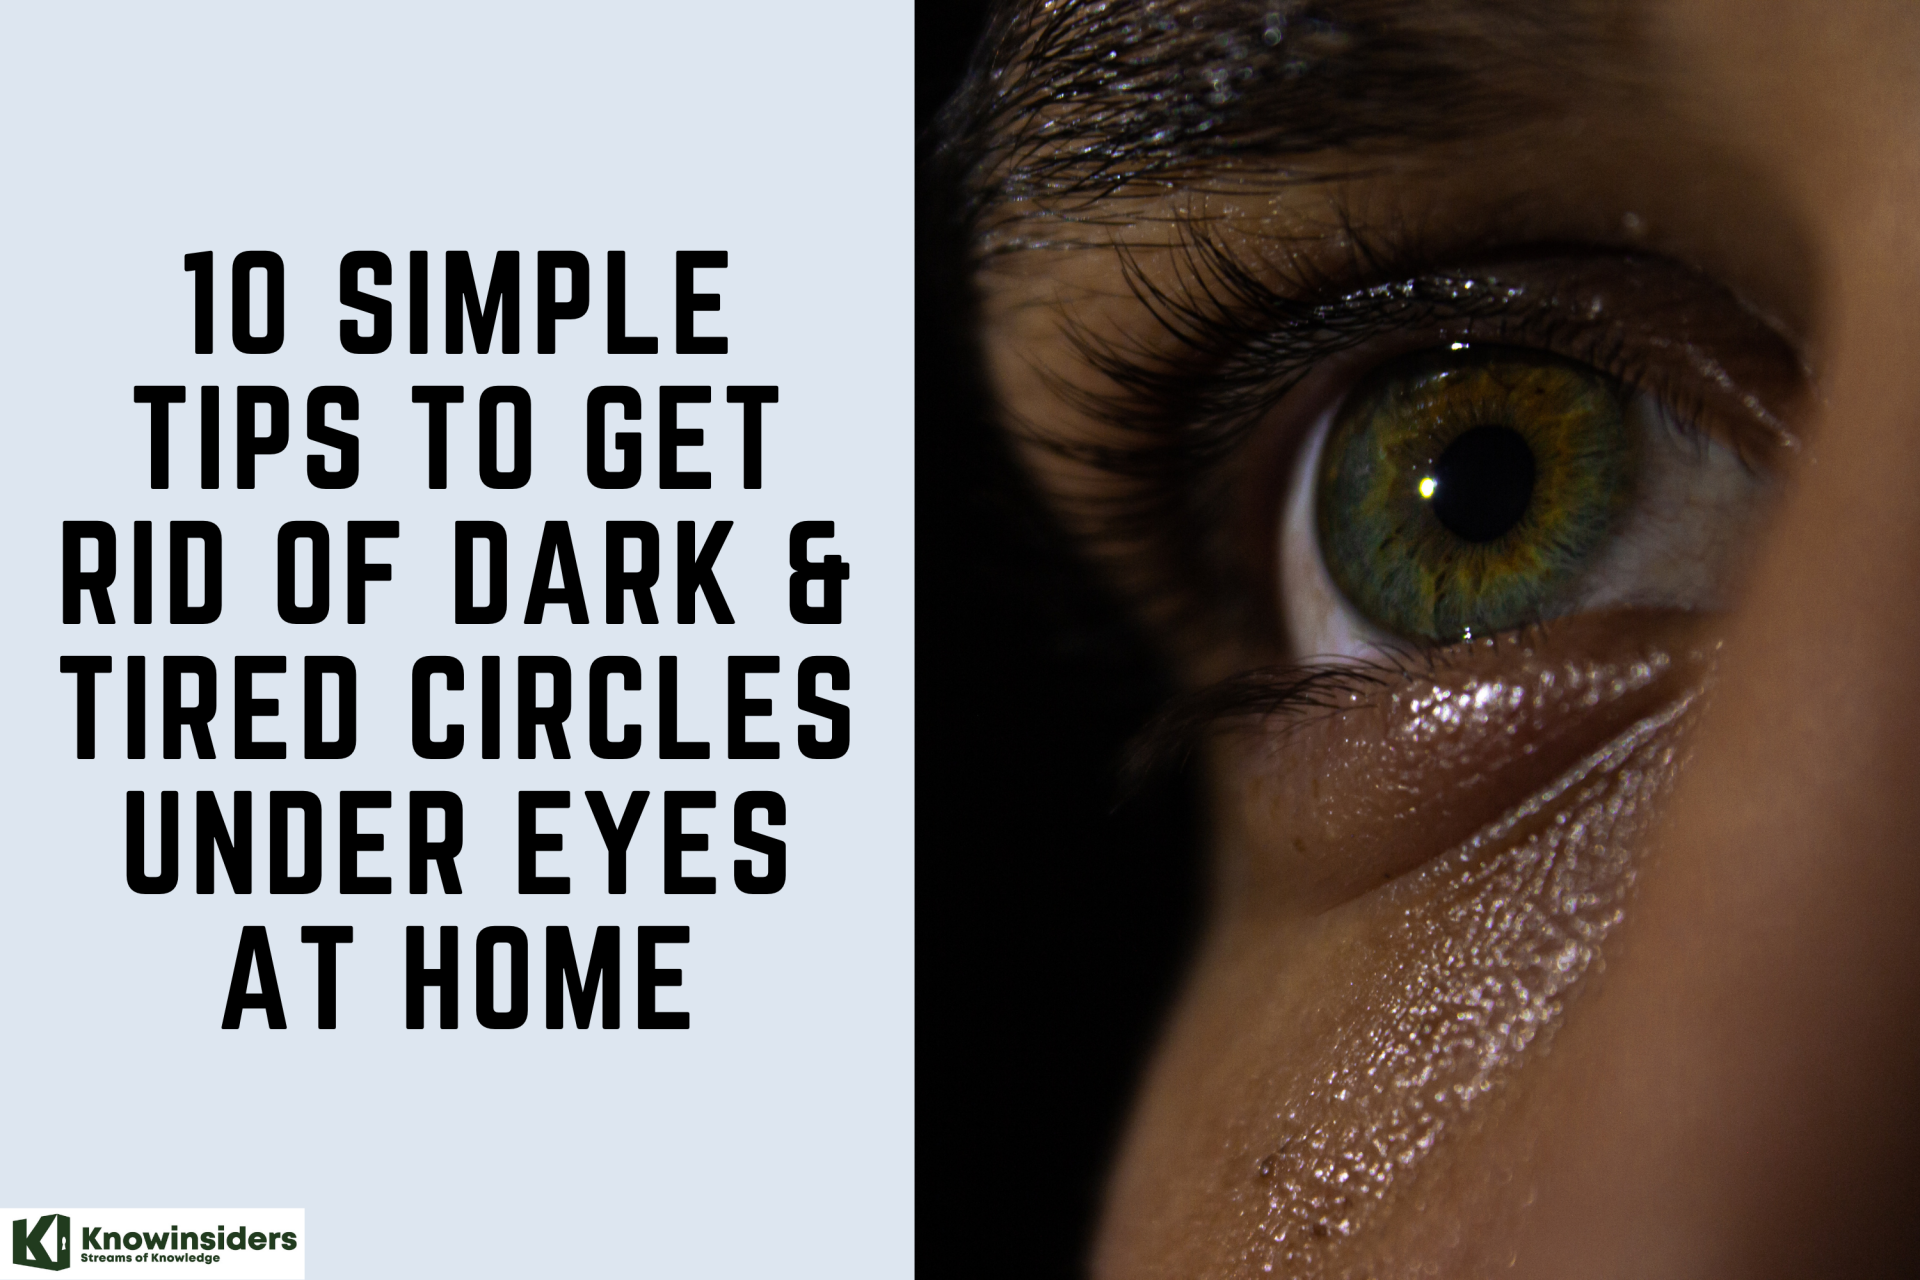 10 Simple Tips to Get Rid of Dark & Tired Circles Under Eyes At Home